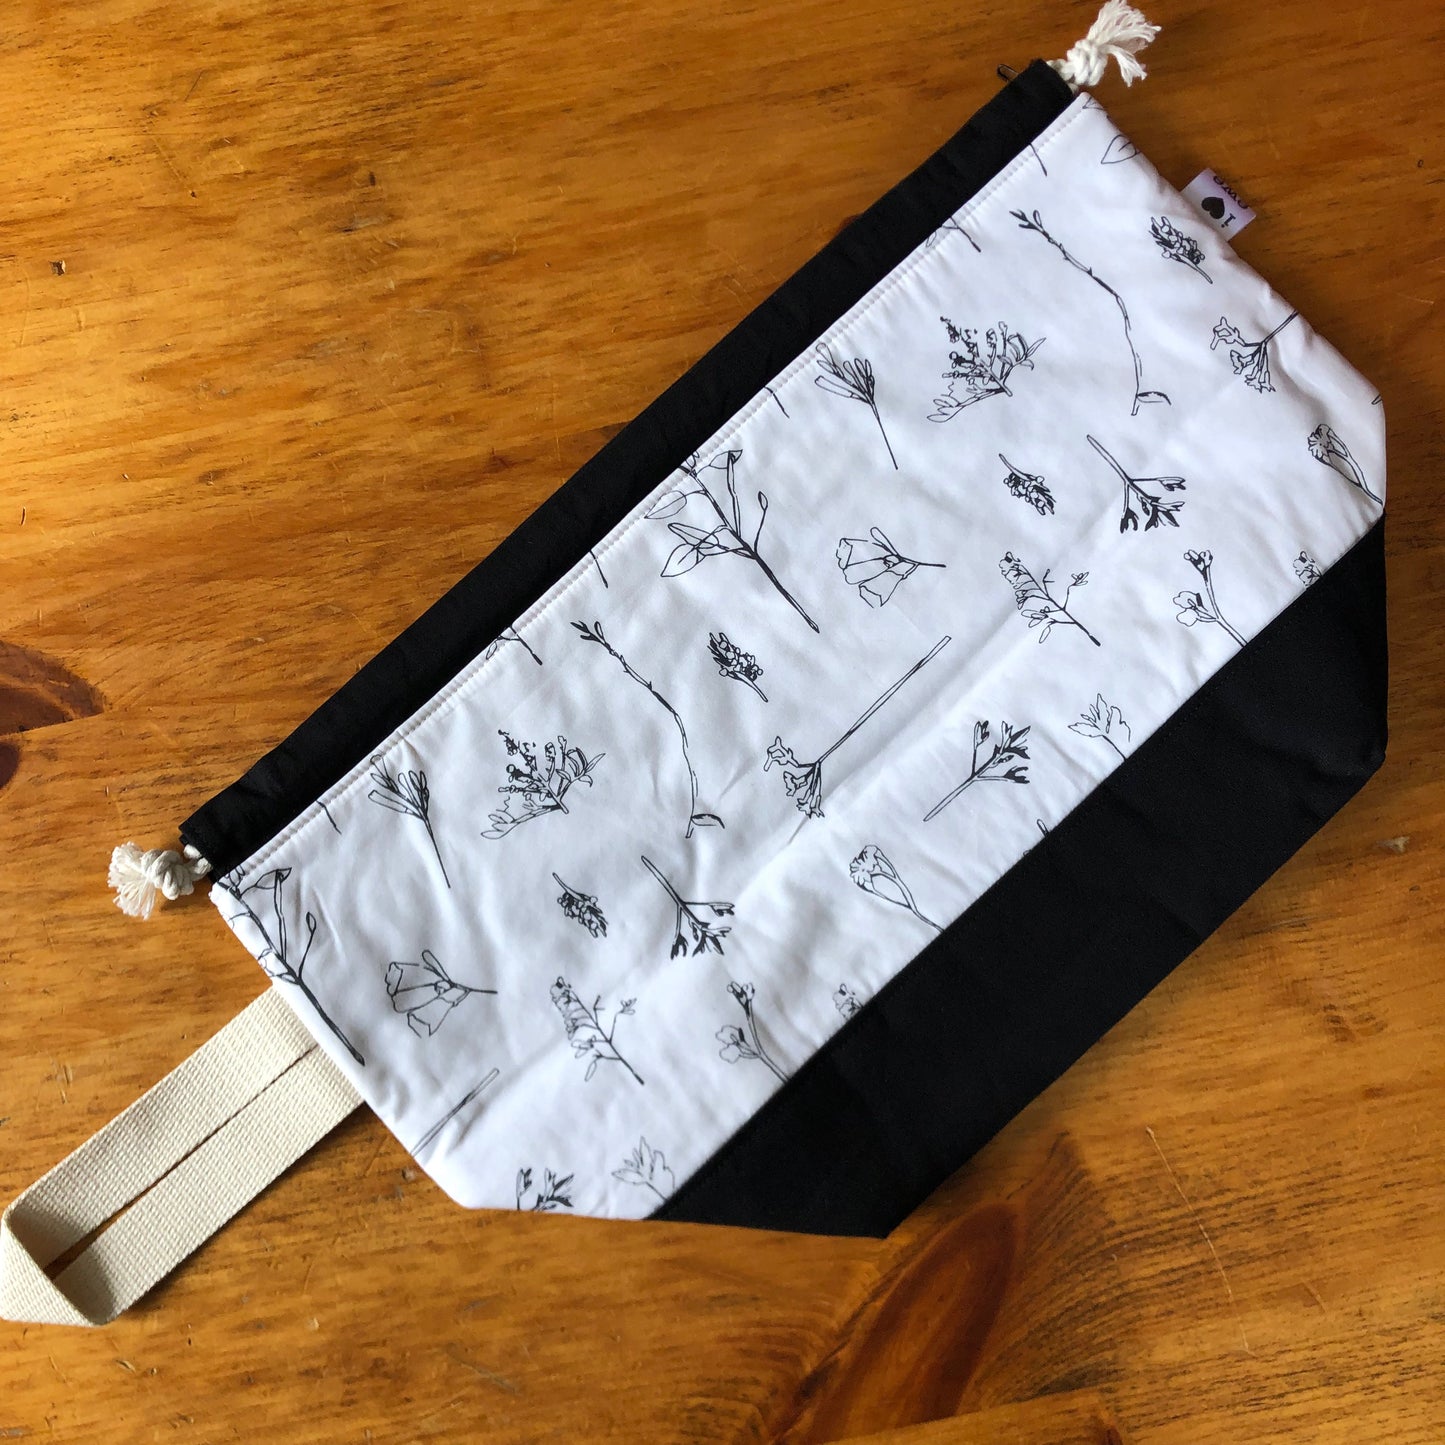 Ivory coloured drawstring bag with black bottom and black flowering grasses or wildflowers